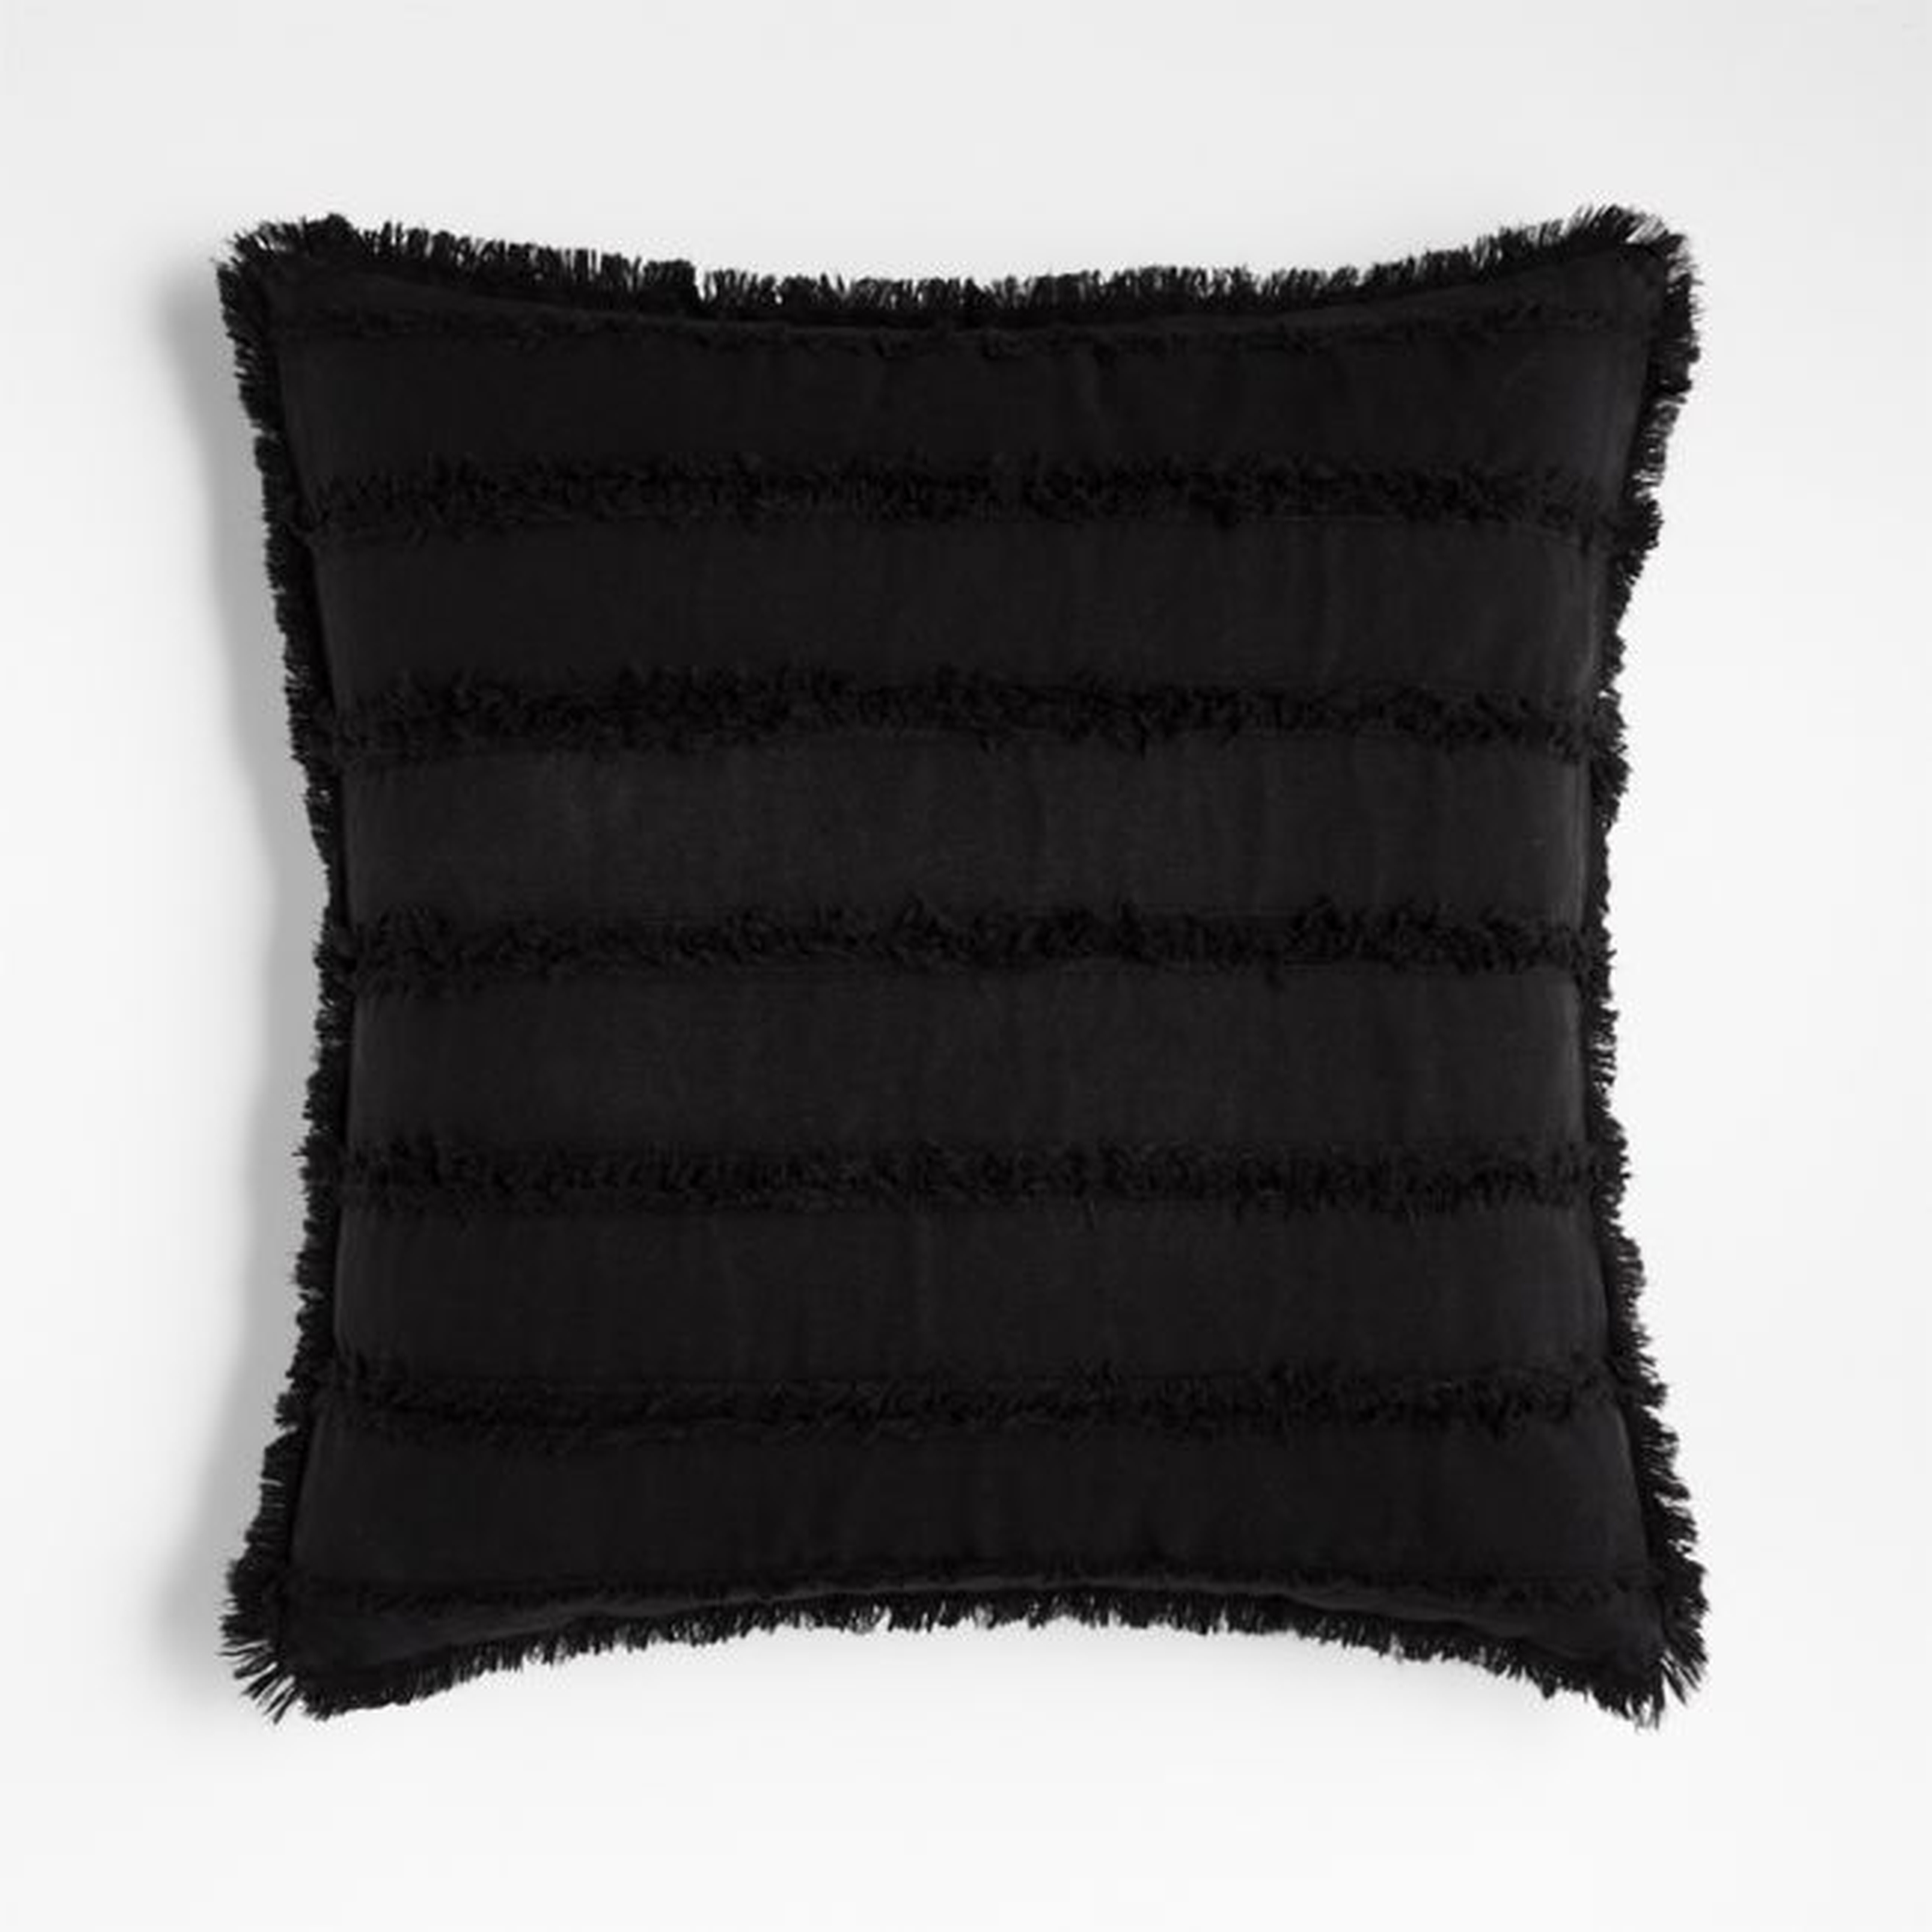 Denim 20 Black Pillow Cover with Down-Alternative Insert - Crate and Barrel